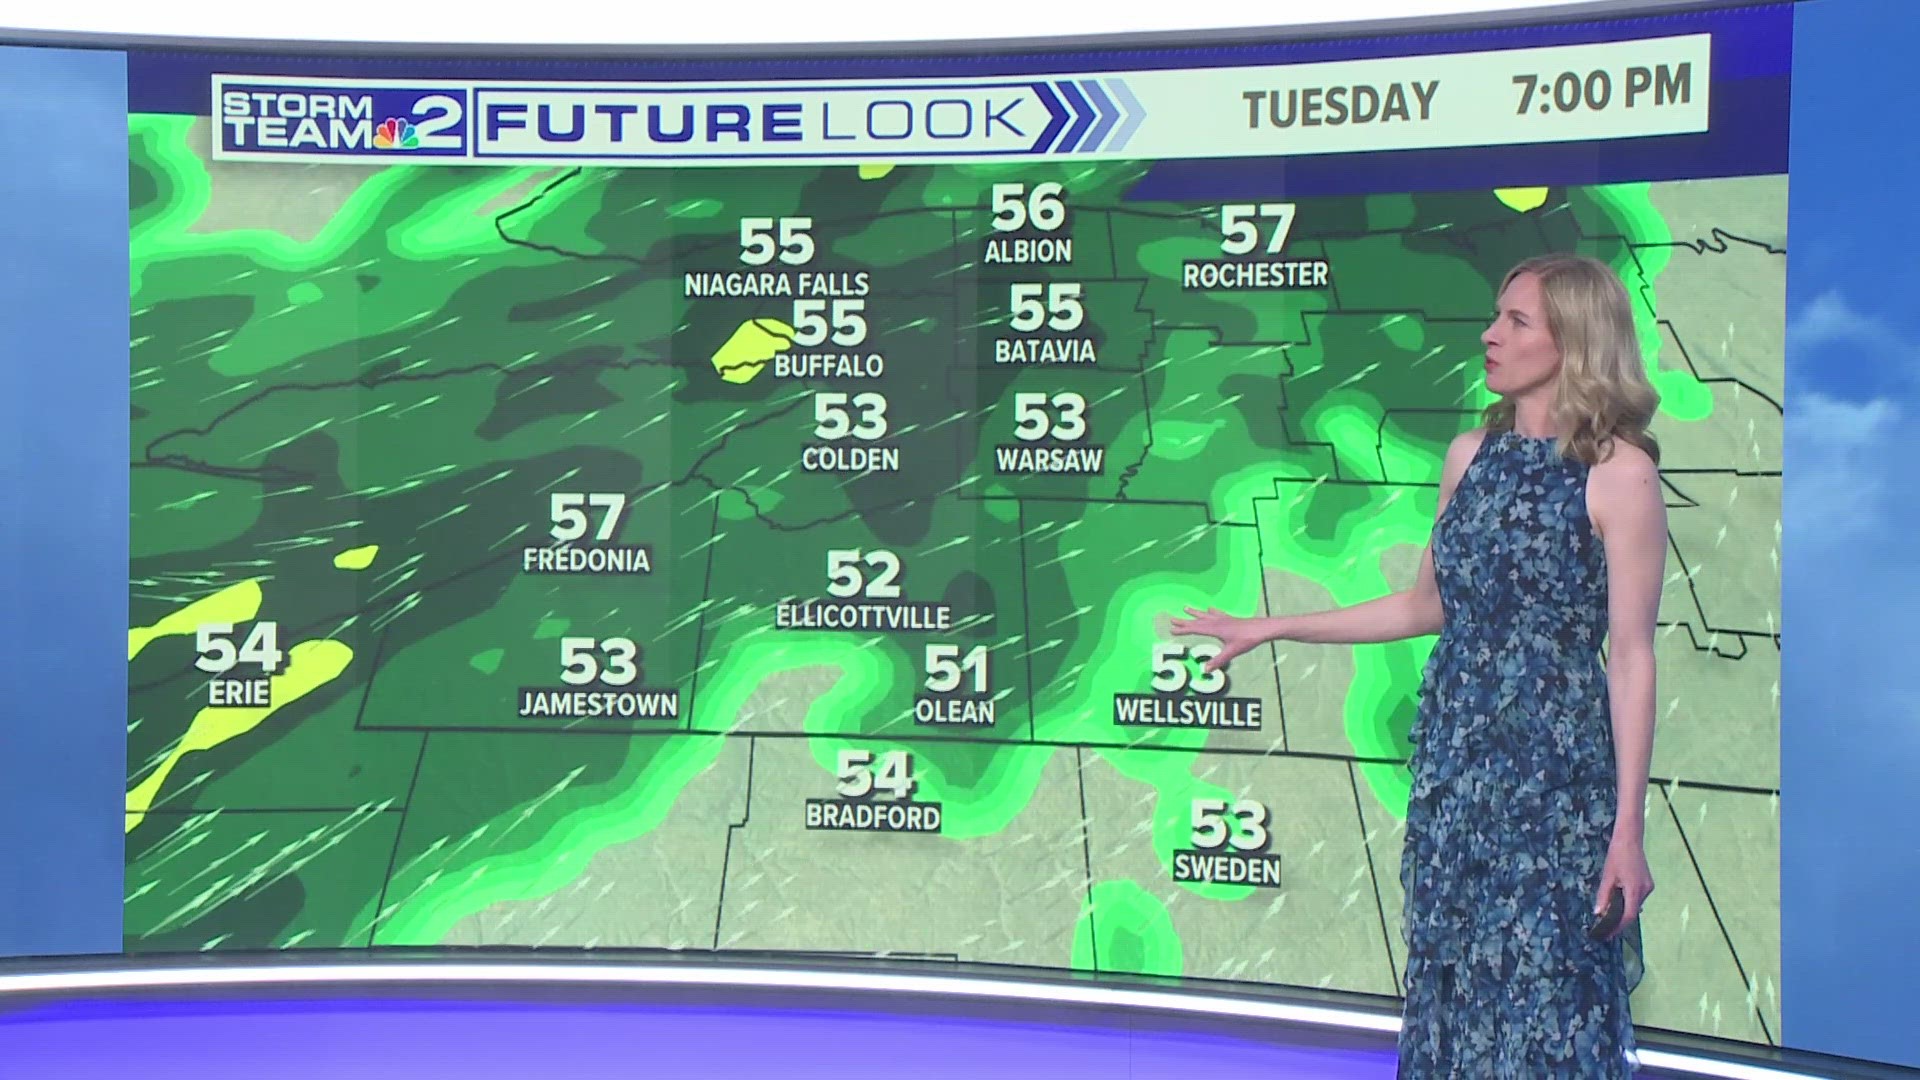 We started the week with some decent weather but Storm Team 2 predicts some storms and colder temperatures before another warm up by the weekend.